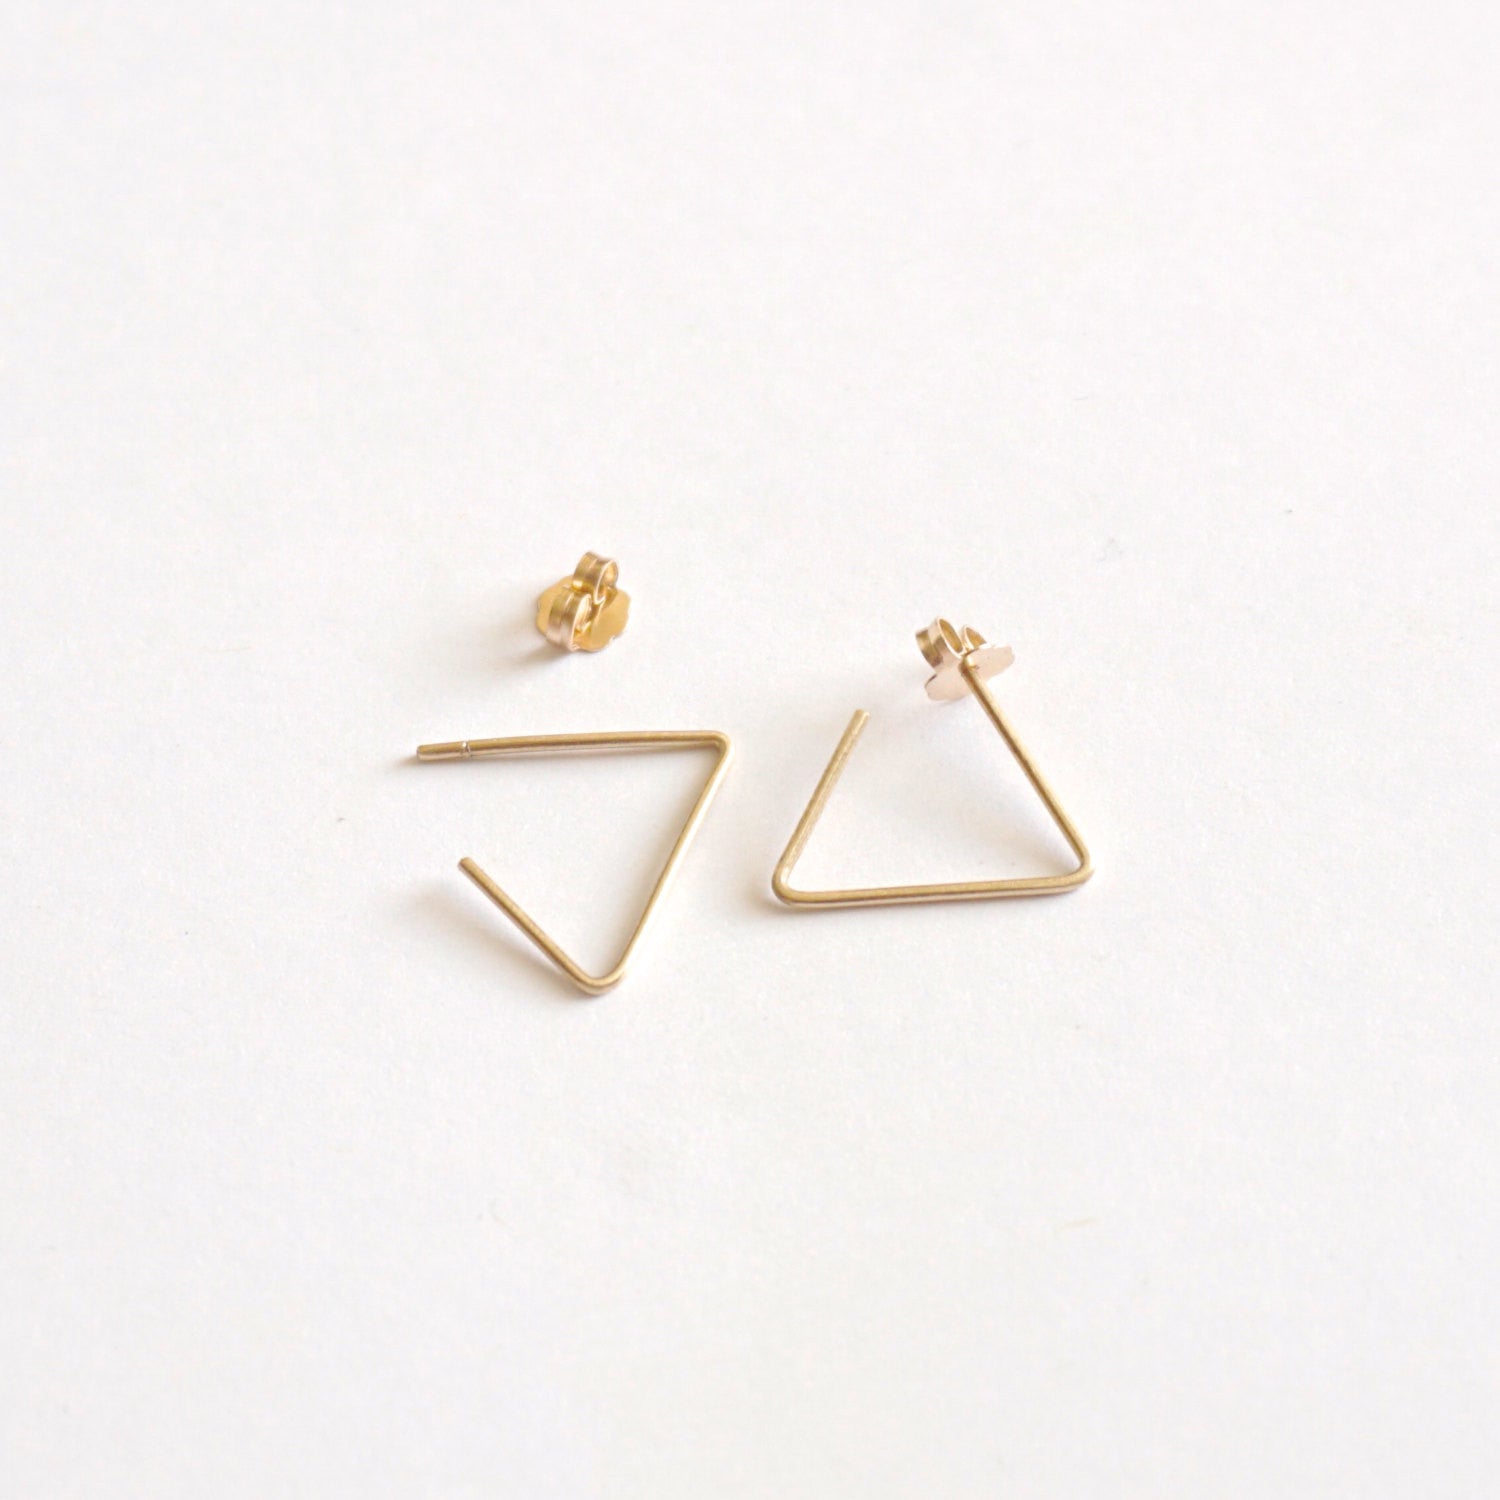 15mm Open Triangle Earrings 034 - Patination Design